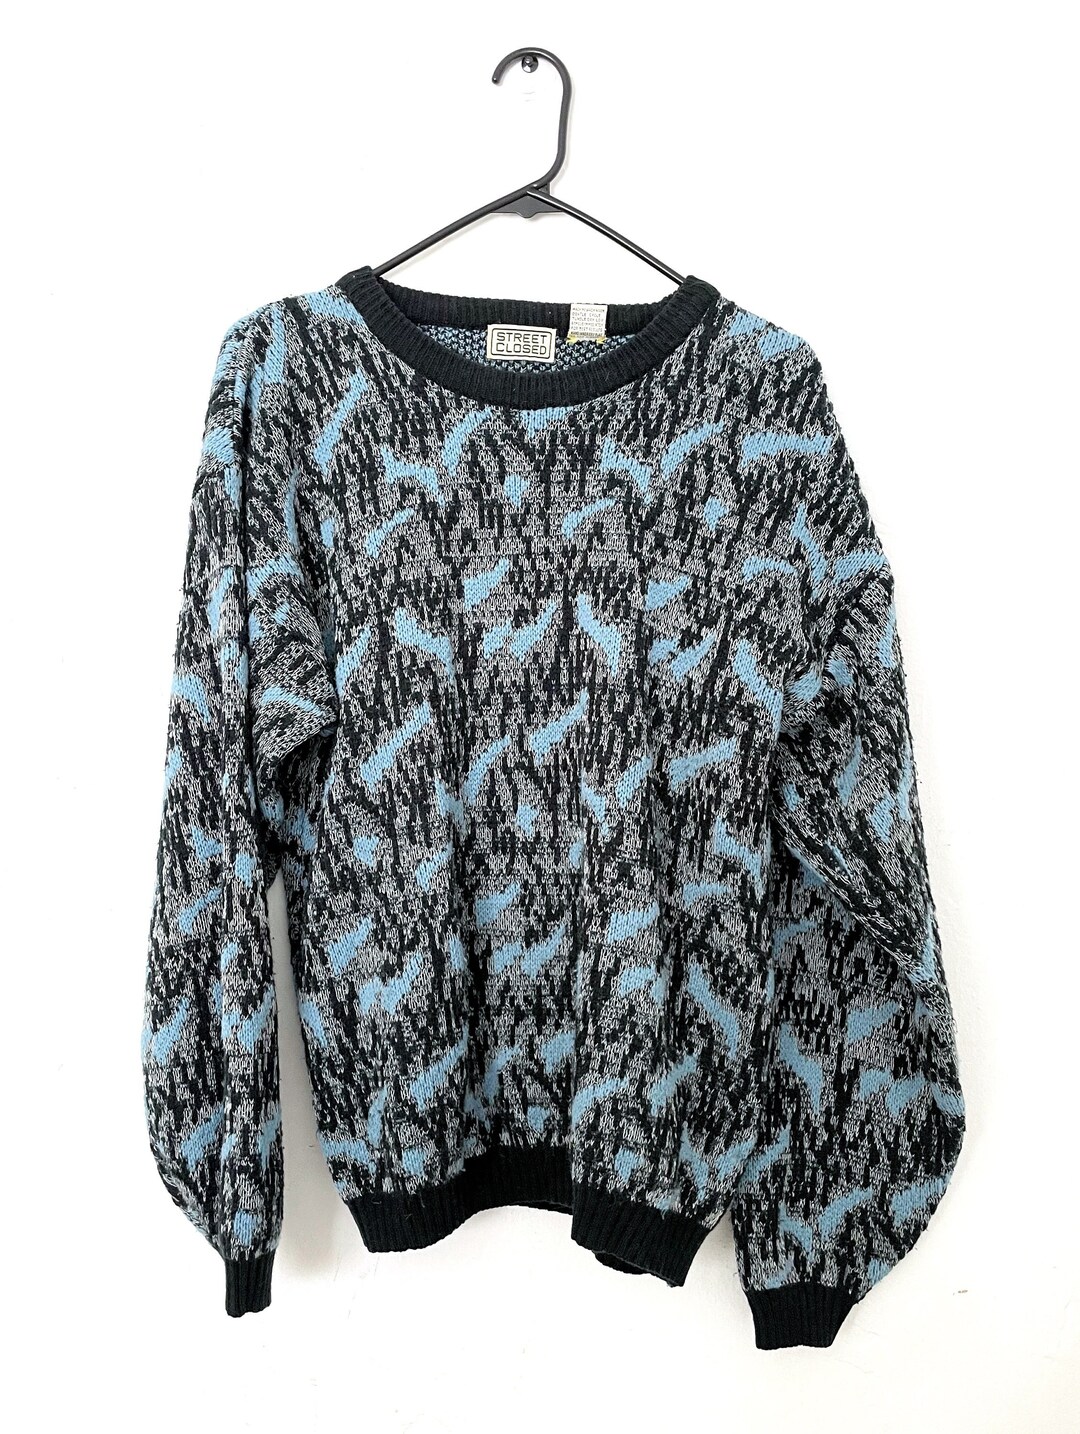 Vintage 80s Cozy Oversized Black and Blue Graphic Sweater - Etsy